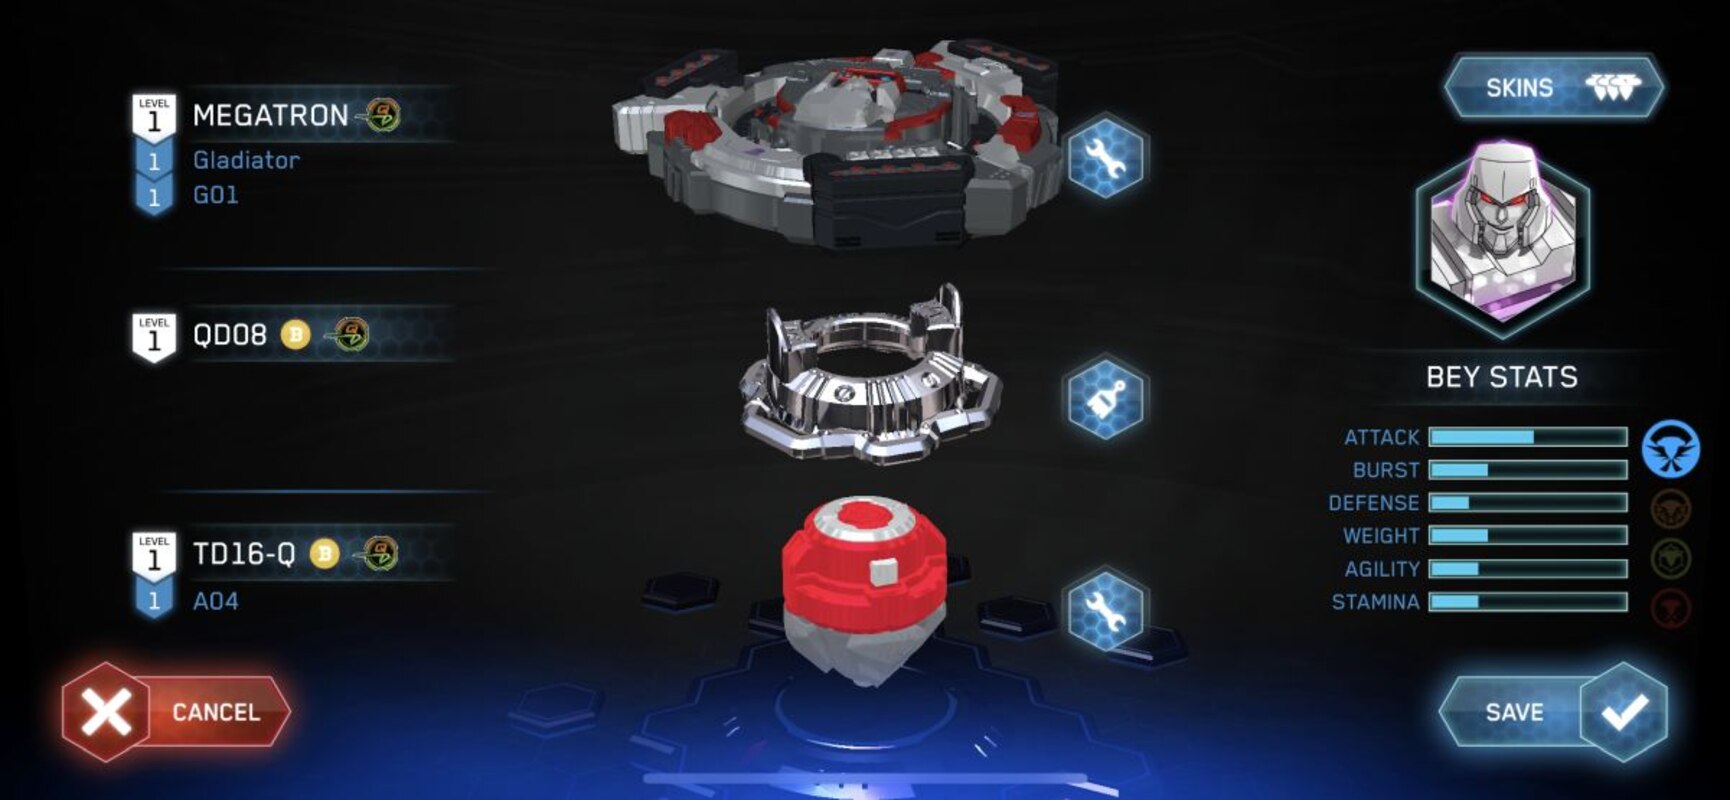 Hasbro on X: Bladers, ever wonder what Bumblebee, Megatron, and Optimus  Prime would look like as Beyblade tops? For the first time ever, limited  edition @transformers Beys are available to check out